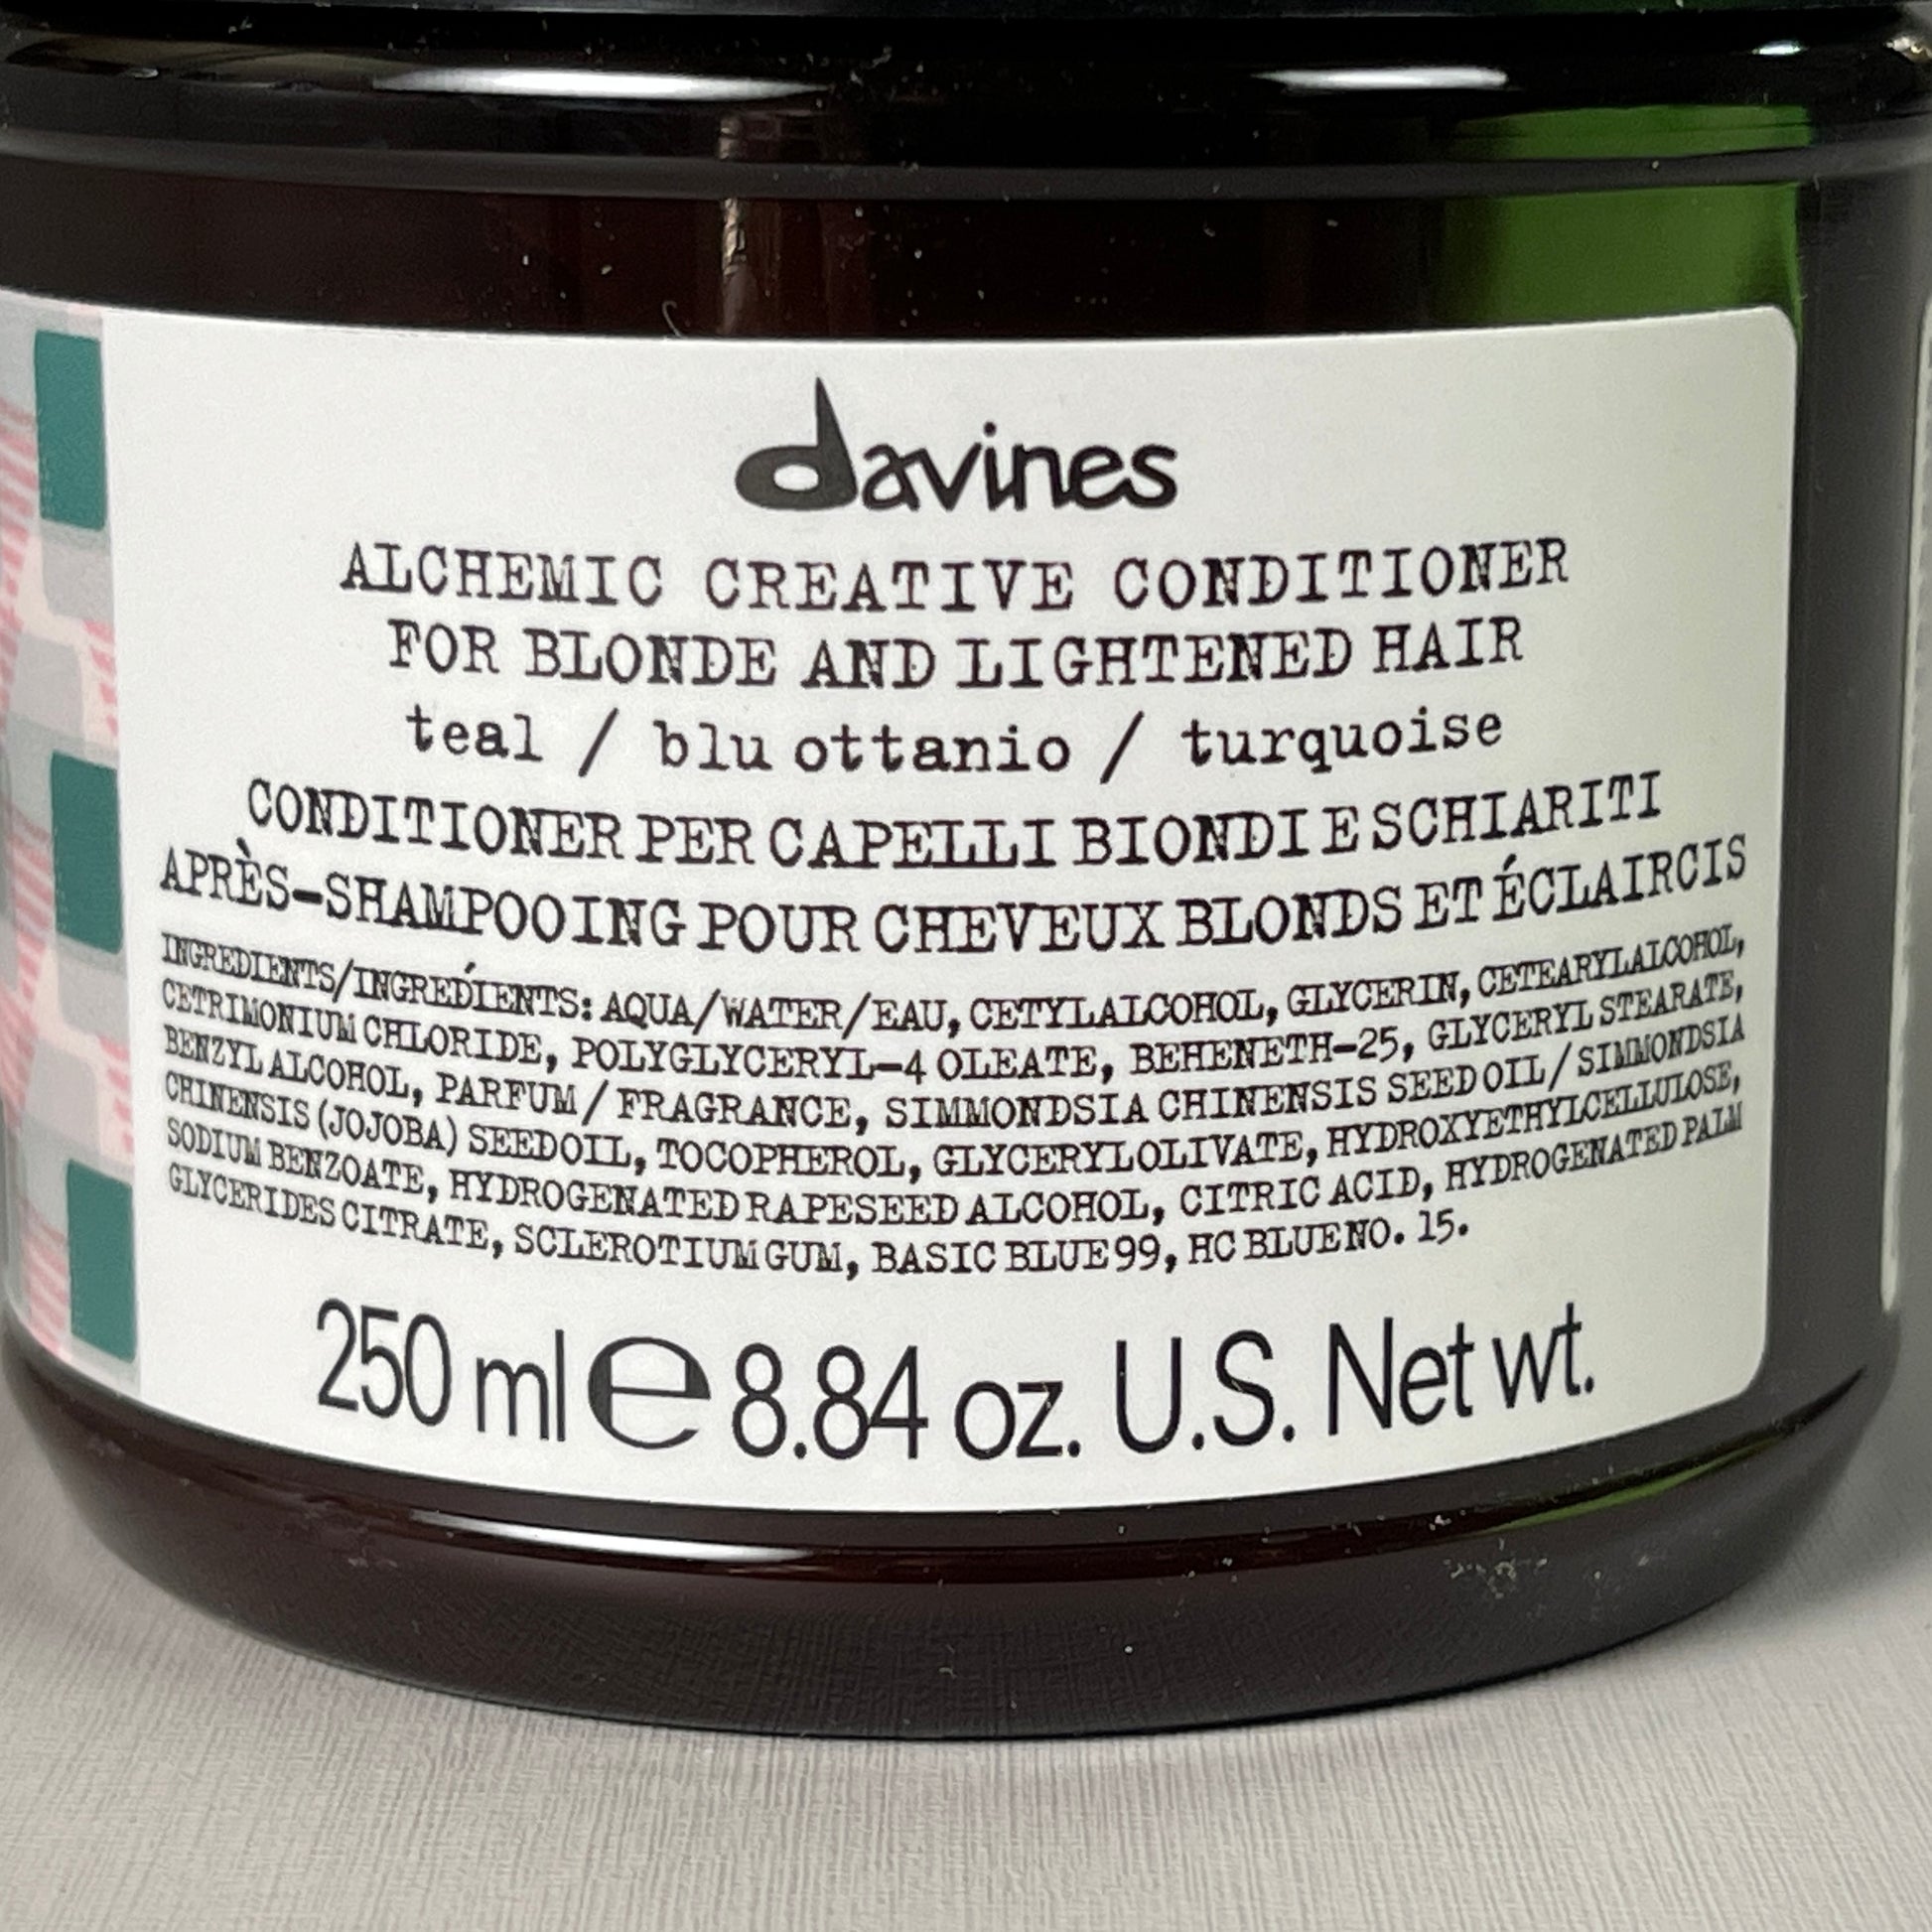 DAVINES Alchemic Creative Conditioner Teal For Blonde and Lightened Hair 8.84oz 67247 (New)